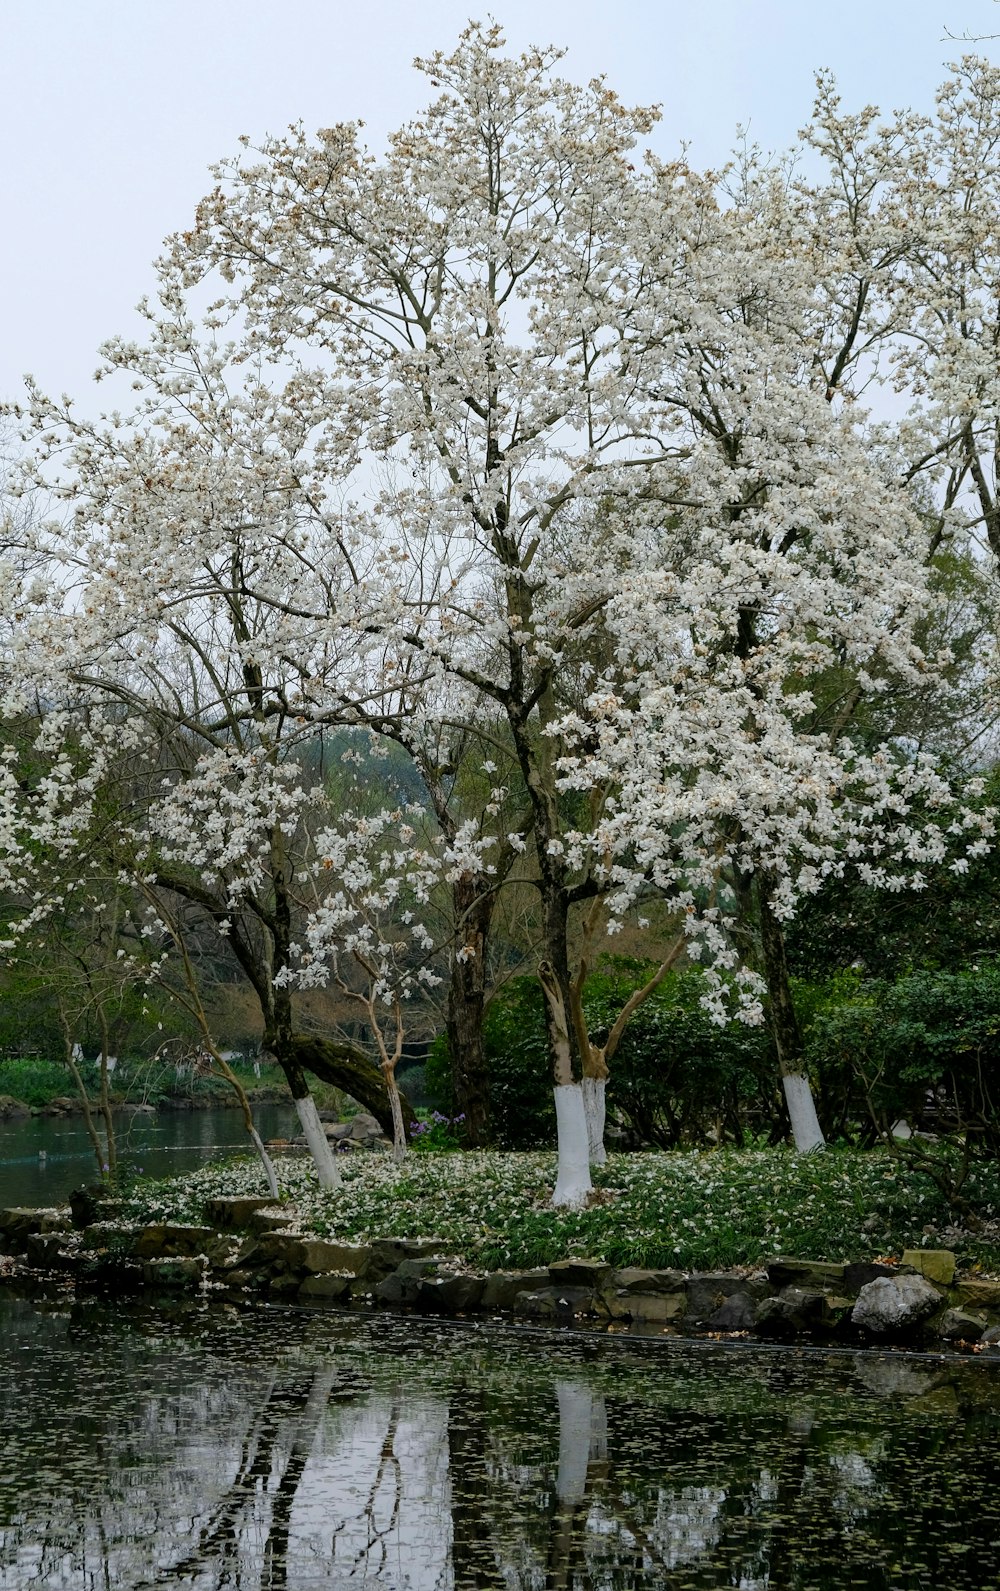 a tree with white flowers near a body of water